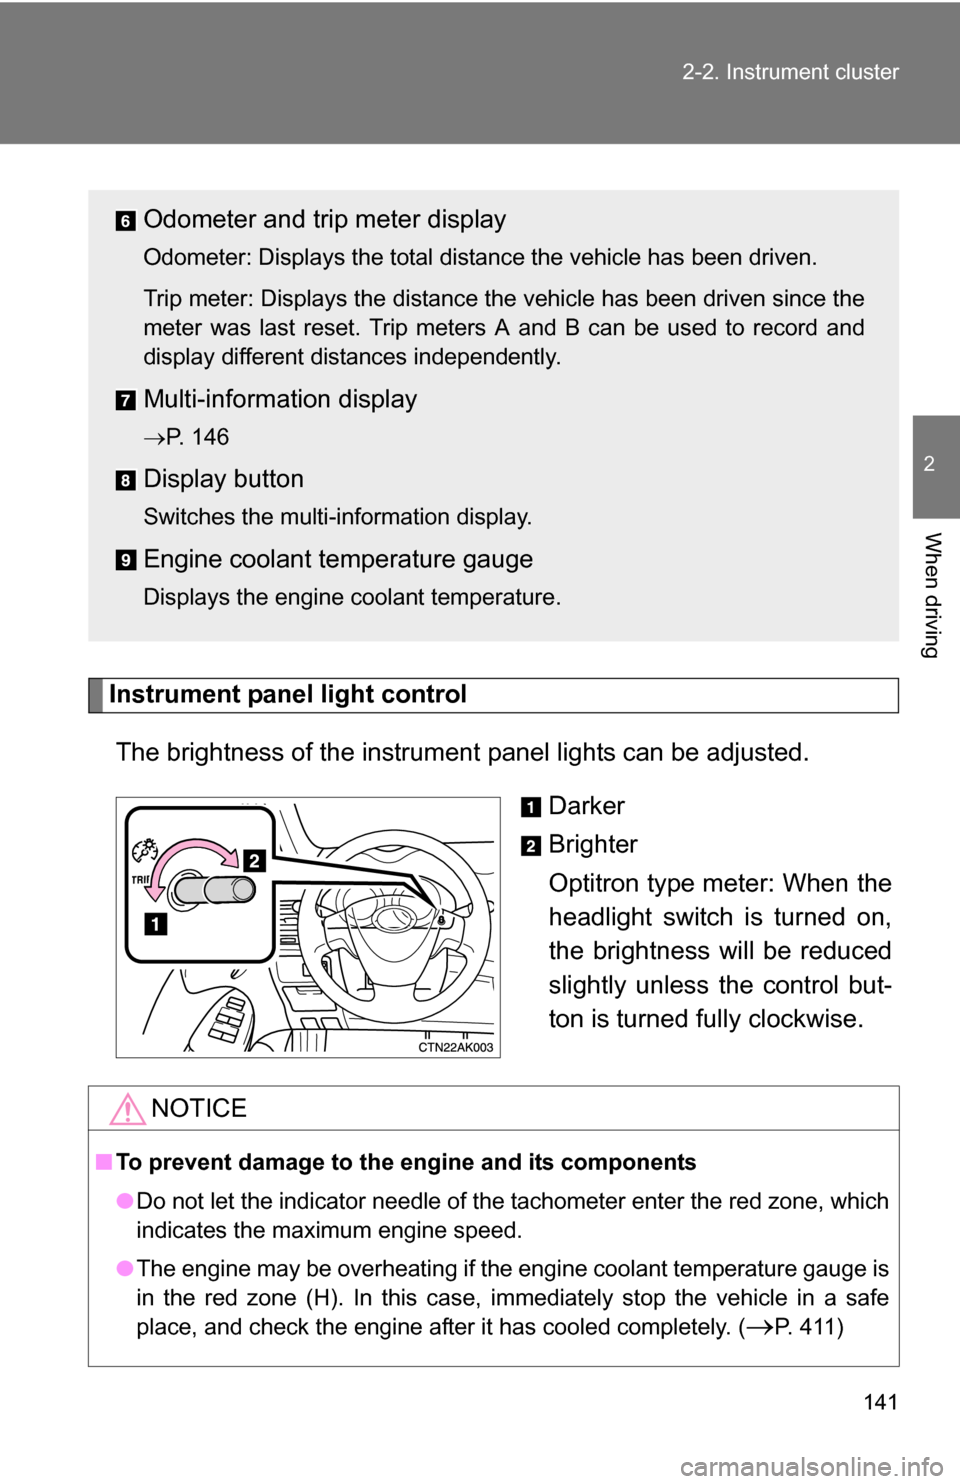 TOYOTA COROLLA 2009 10.G Owners Manual 141
2-2. Instrument cluster
2
When driving
Instrument panel light control
The brightness of the instrument  panel lights can be adjusted. 
Darker
Brighter
Optitron type meter: When the
headlight switc